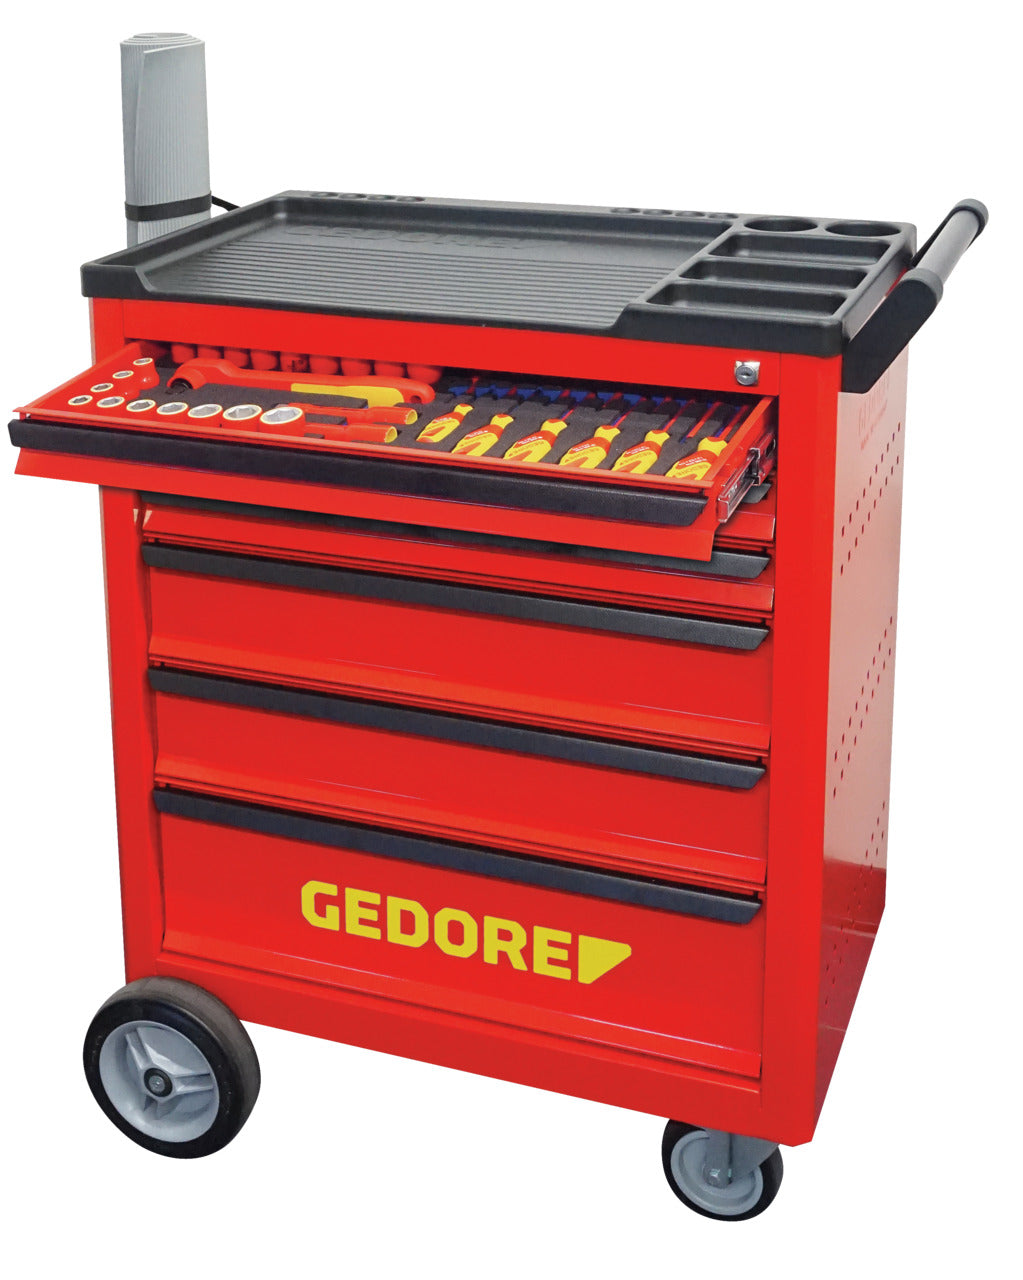 Gedore tool trolley with high voltage assortment with top drawer open.